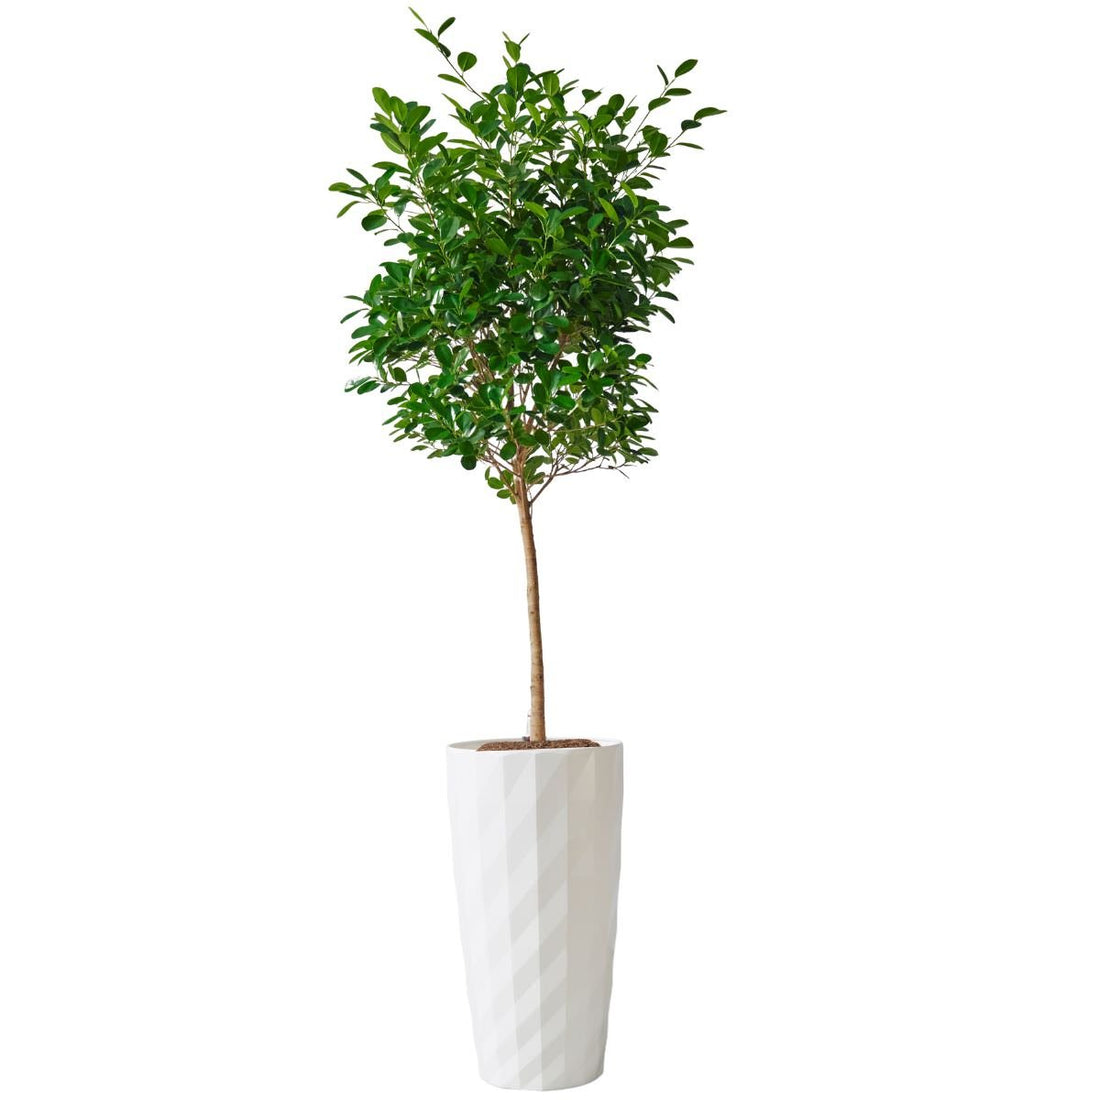 Ficus Moclame Potted In Lechuza Diamante Planter - White - My City Plants